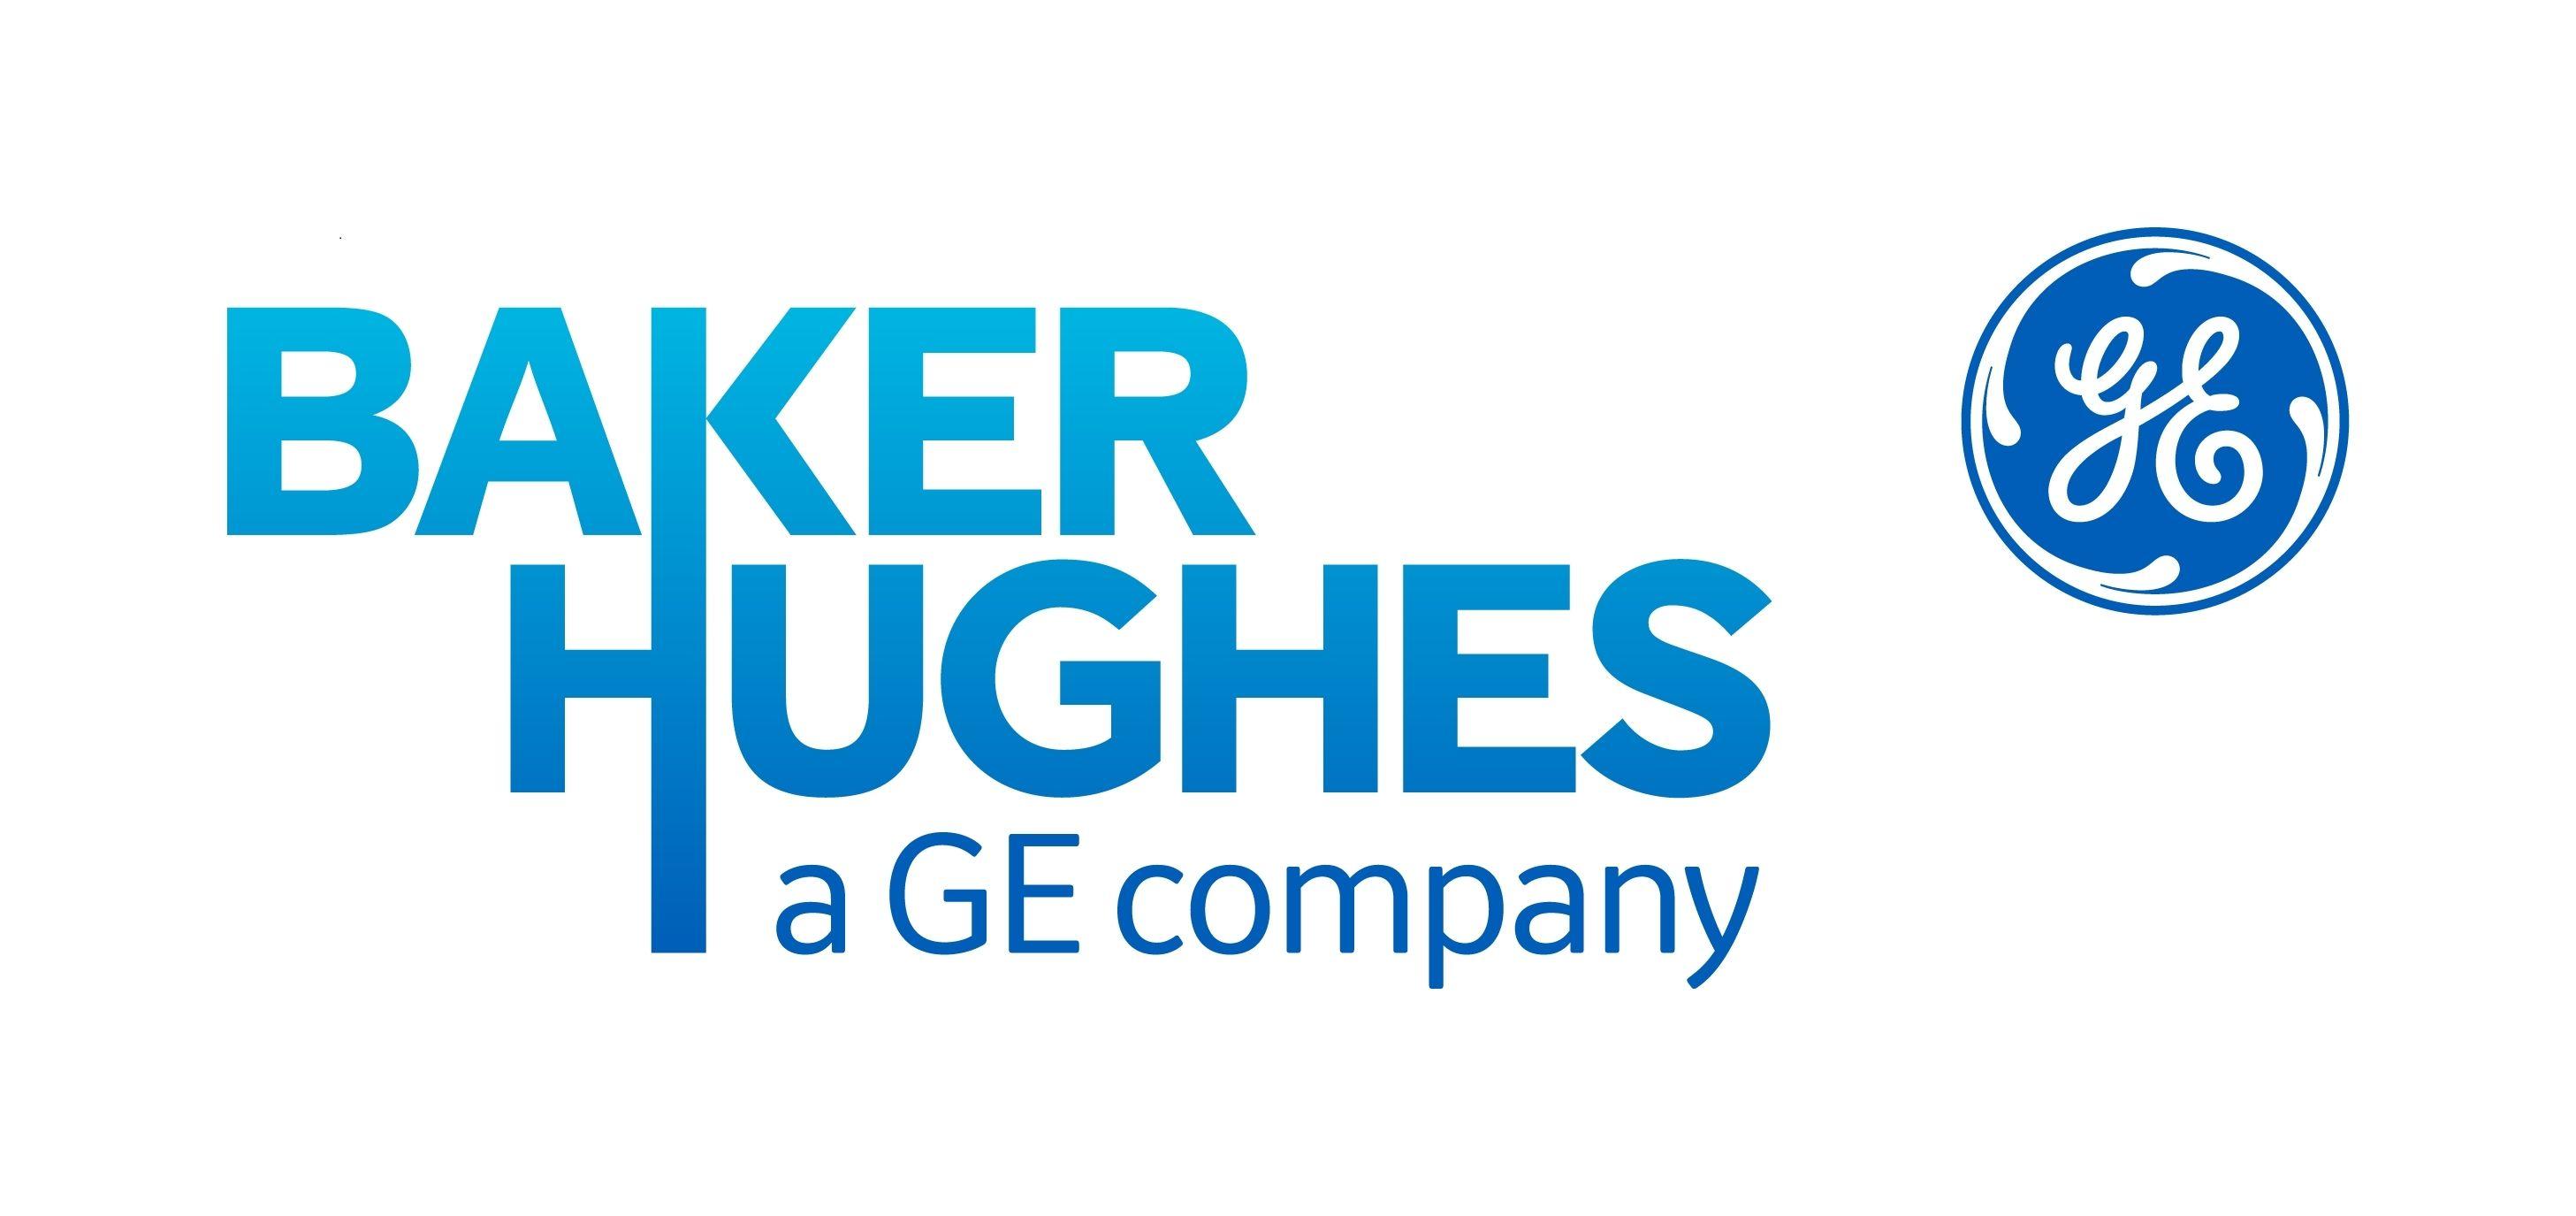 Small General Electric Logo - Baker Hughes, a GE company and General Electric Company Announce a ...